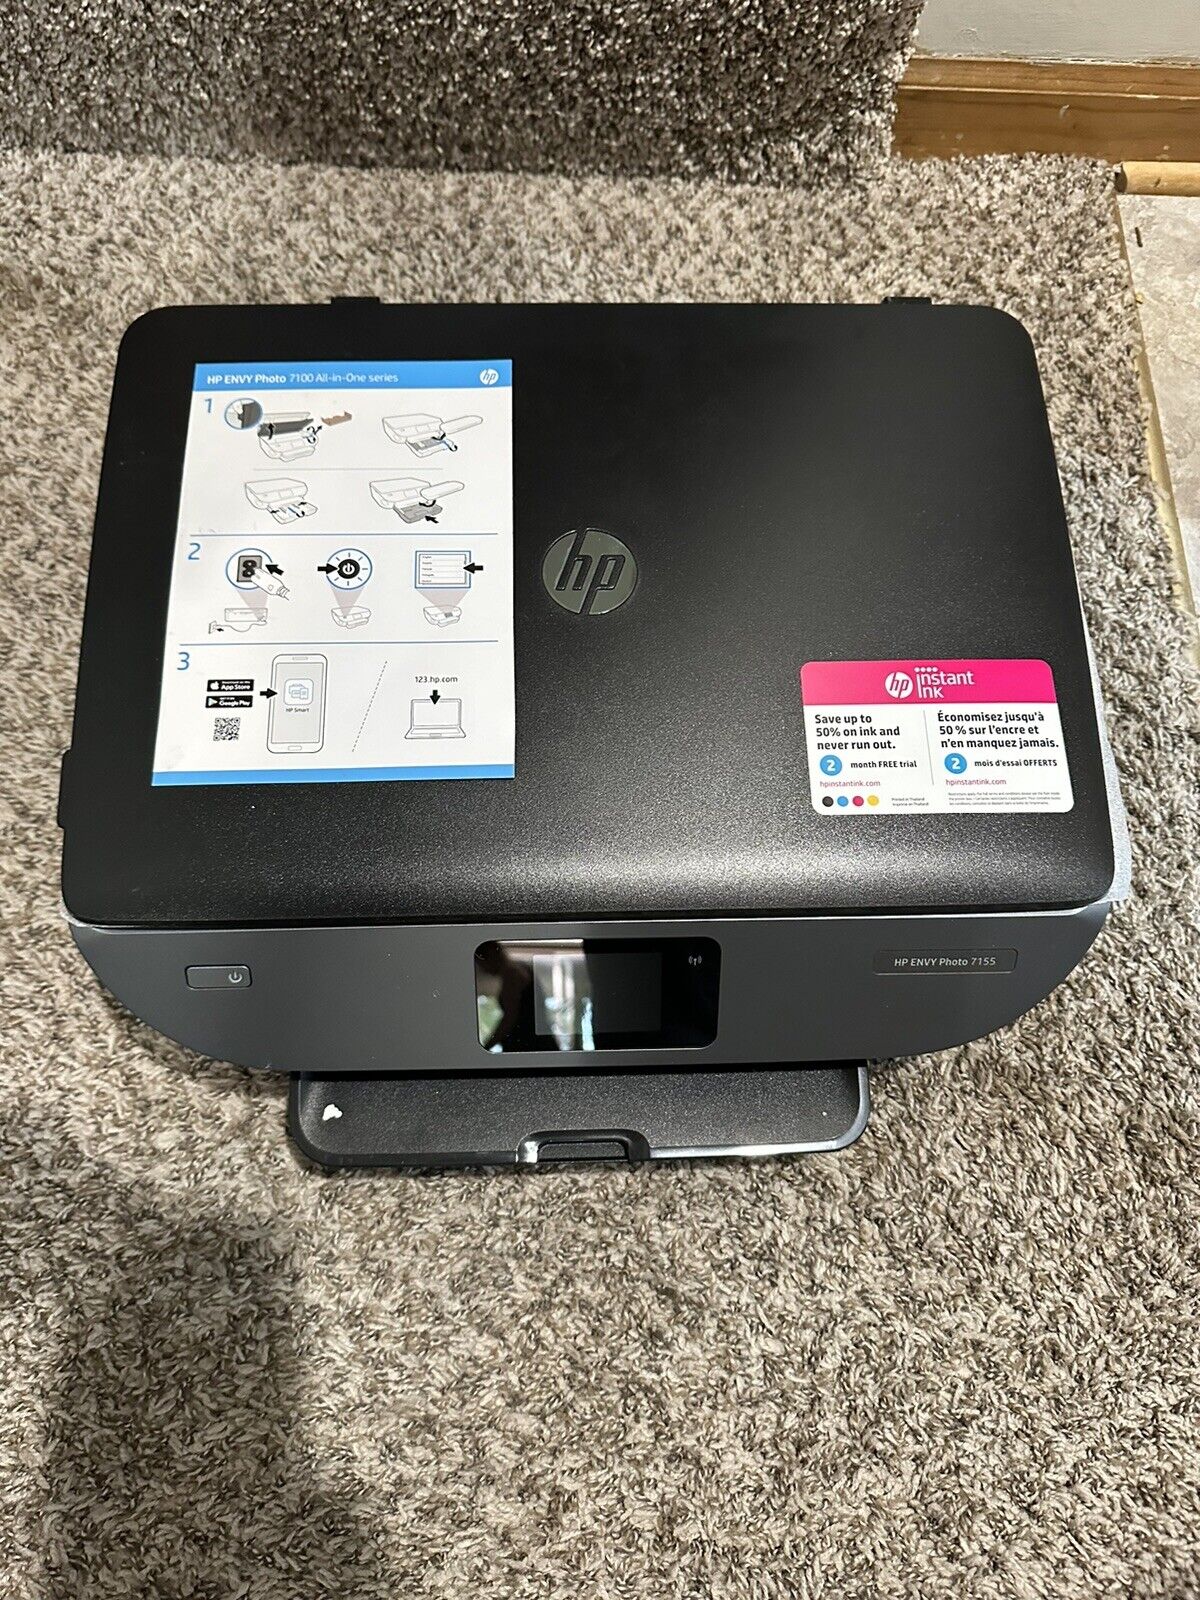 NEW BARELY USED PRINTER HP Envy 7155 All-In-One